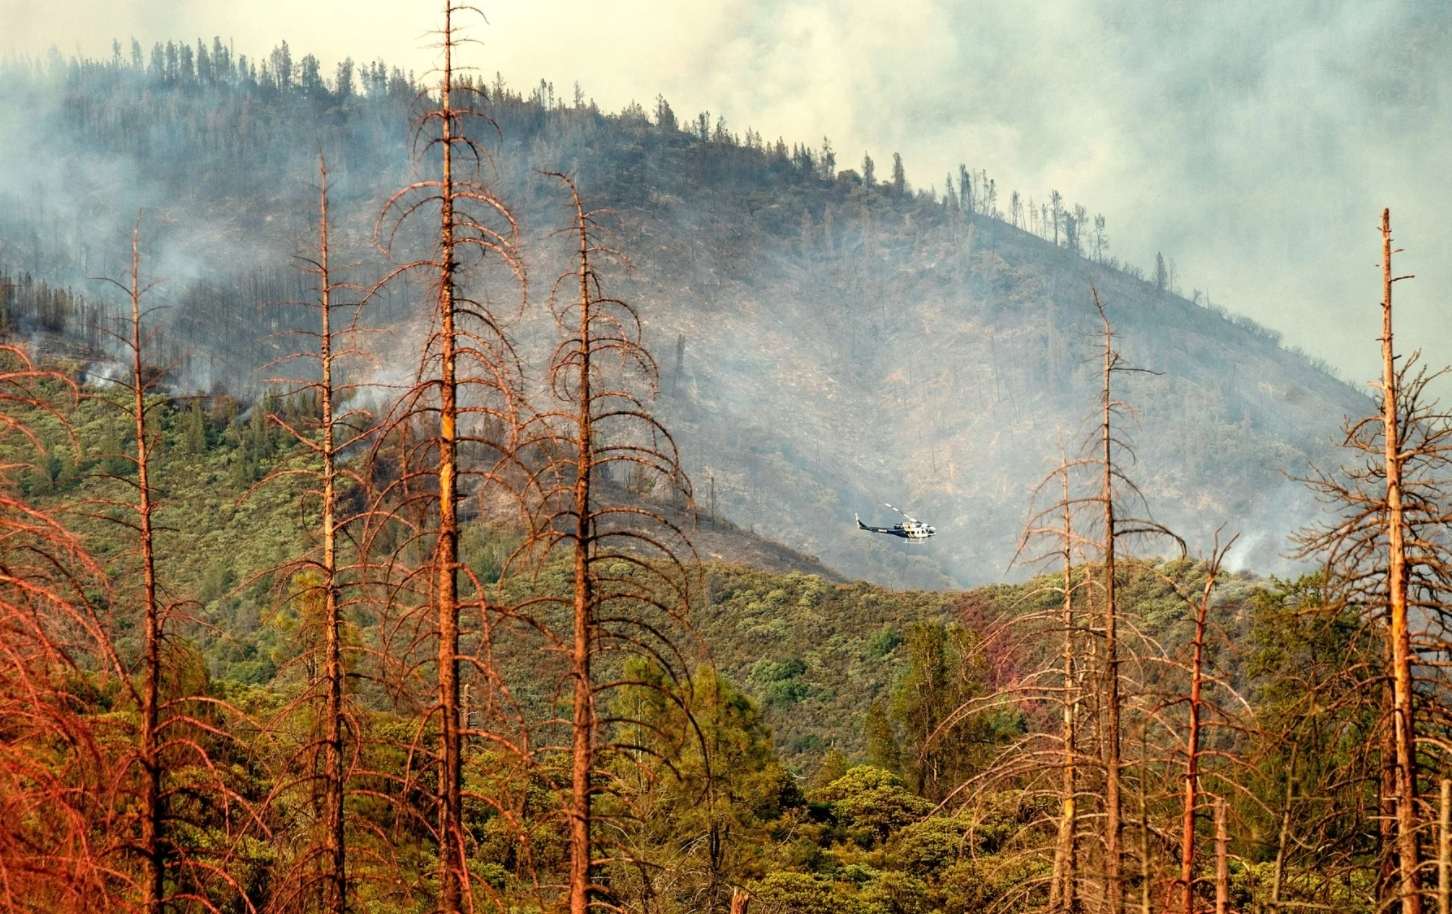 A PESKY BEETLE IS PLAYING A BIG ROLE IN WILDFIRE OUTBREAKS